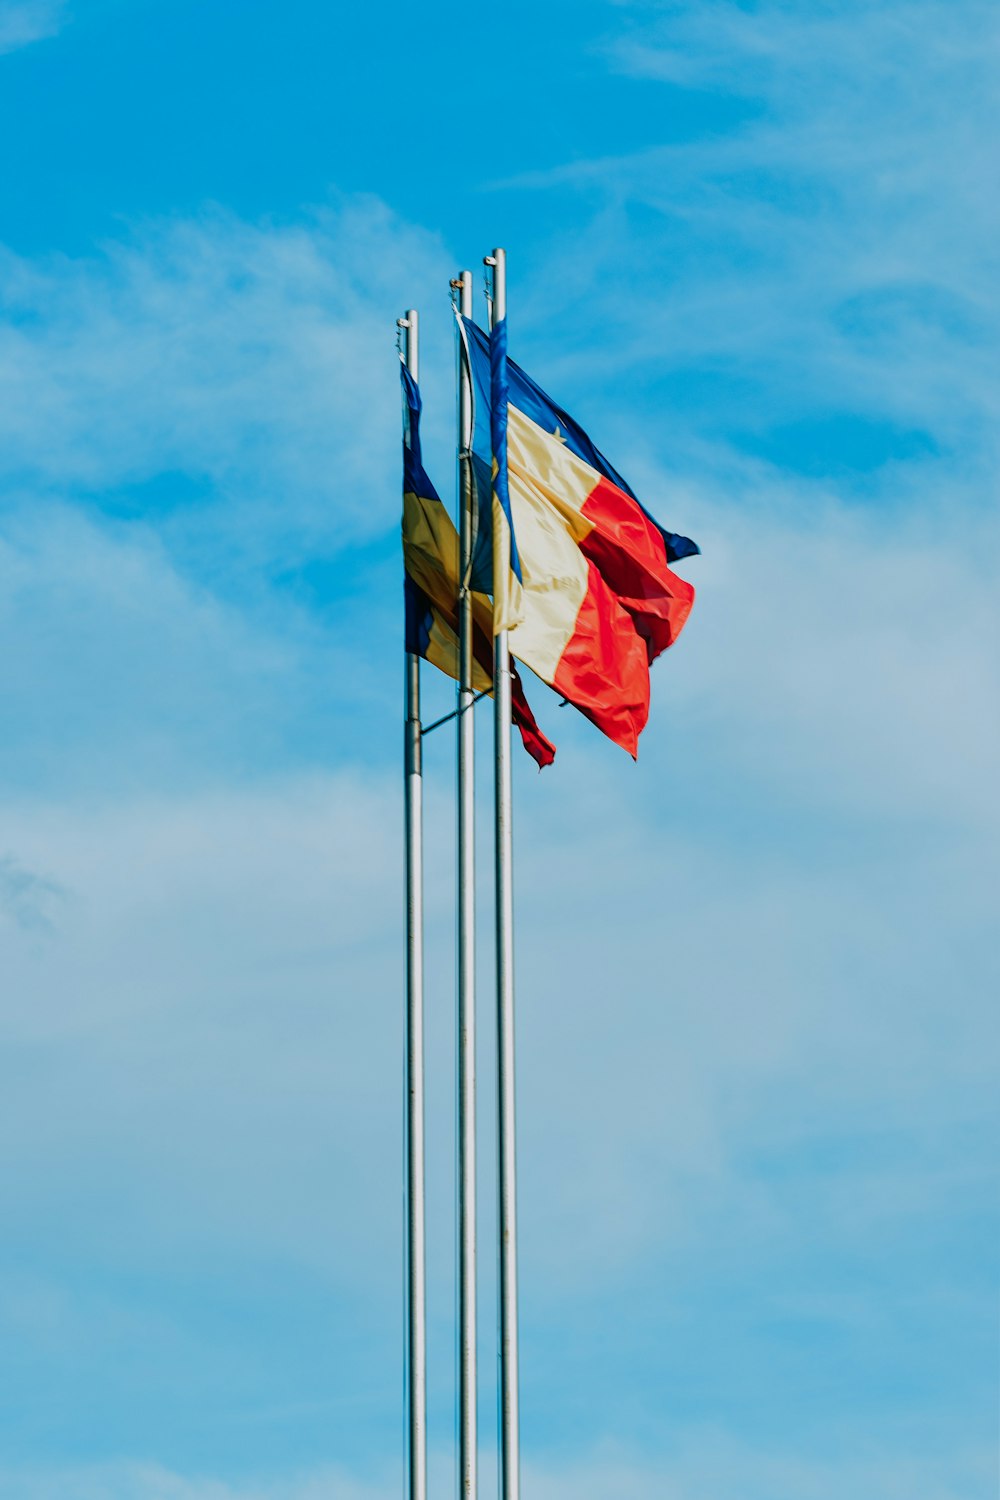 yellow red and blue flag under white clouds and blue sky during daytime